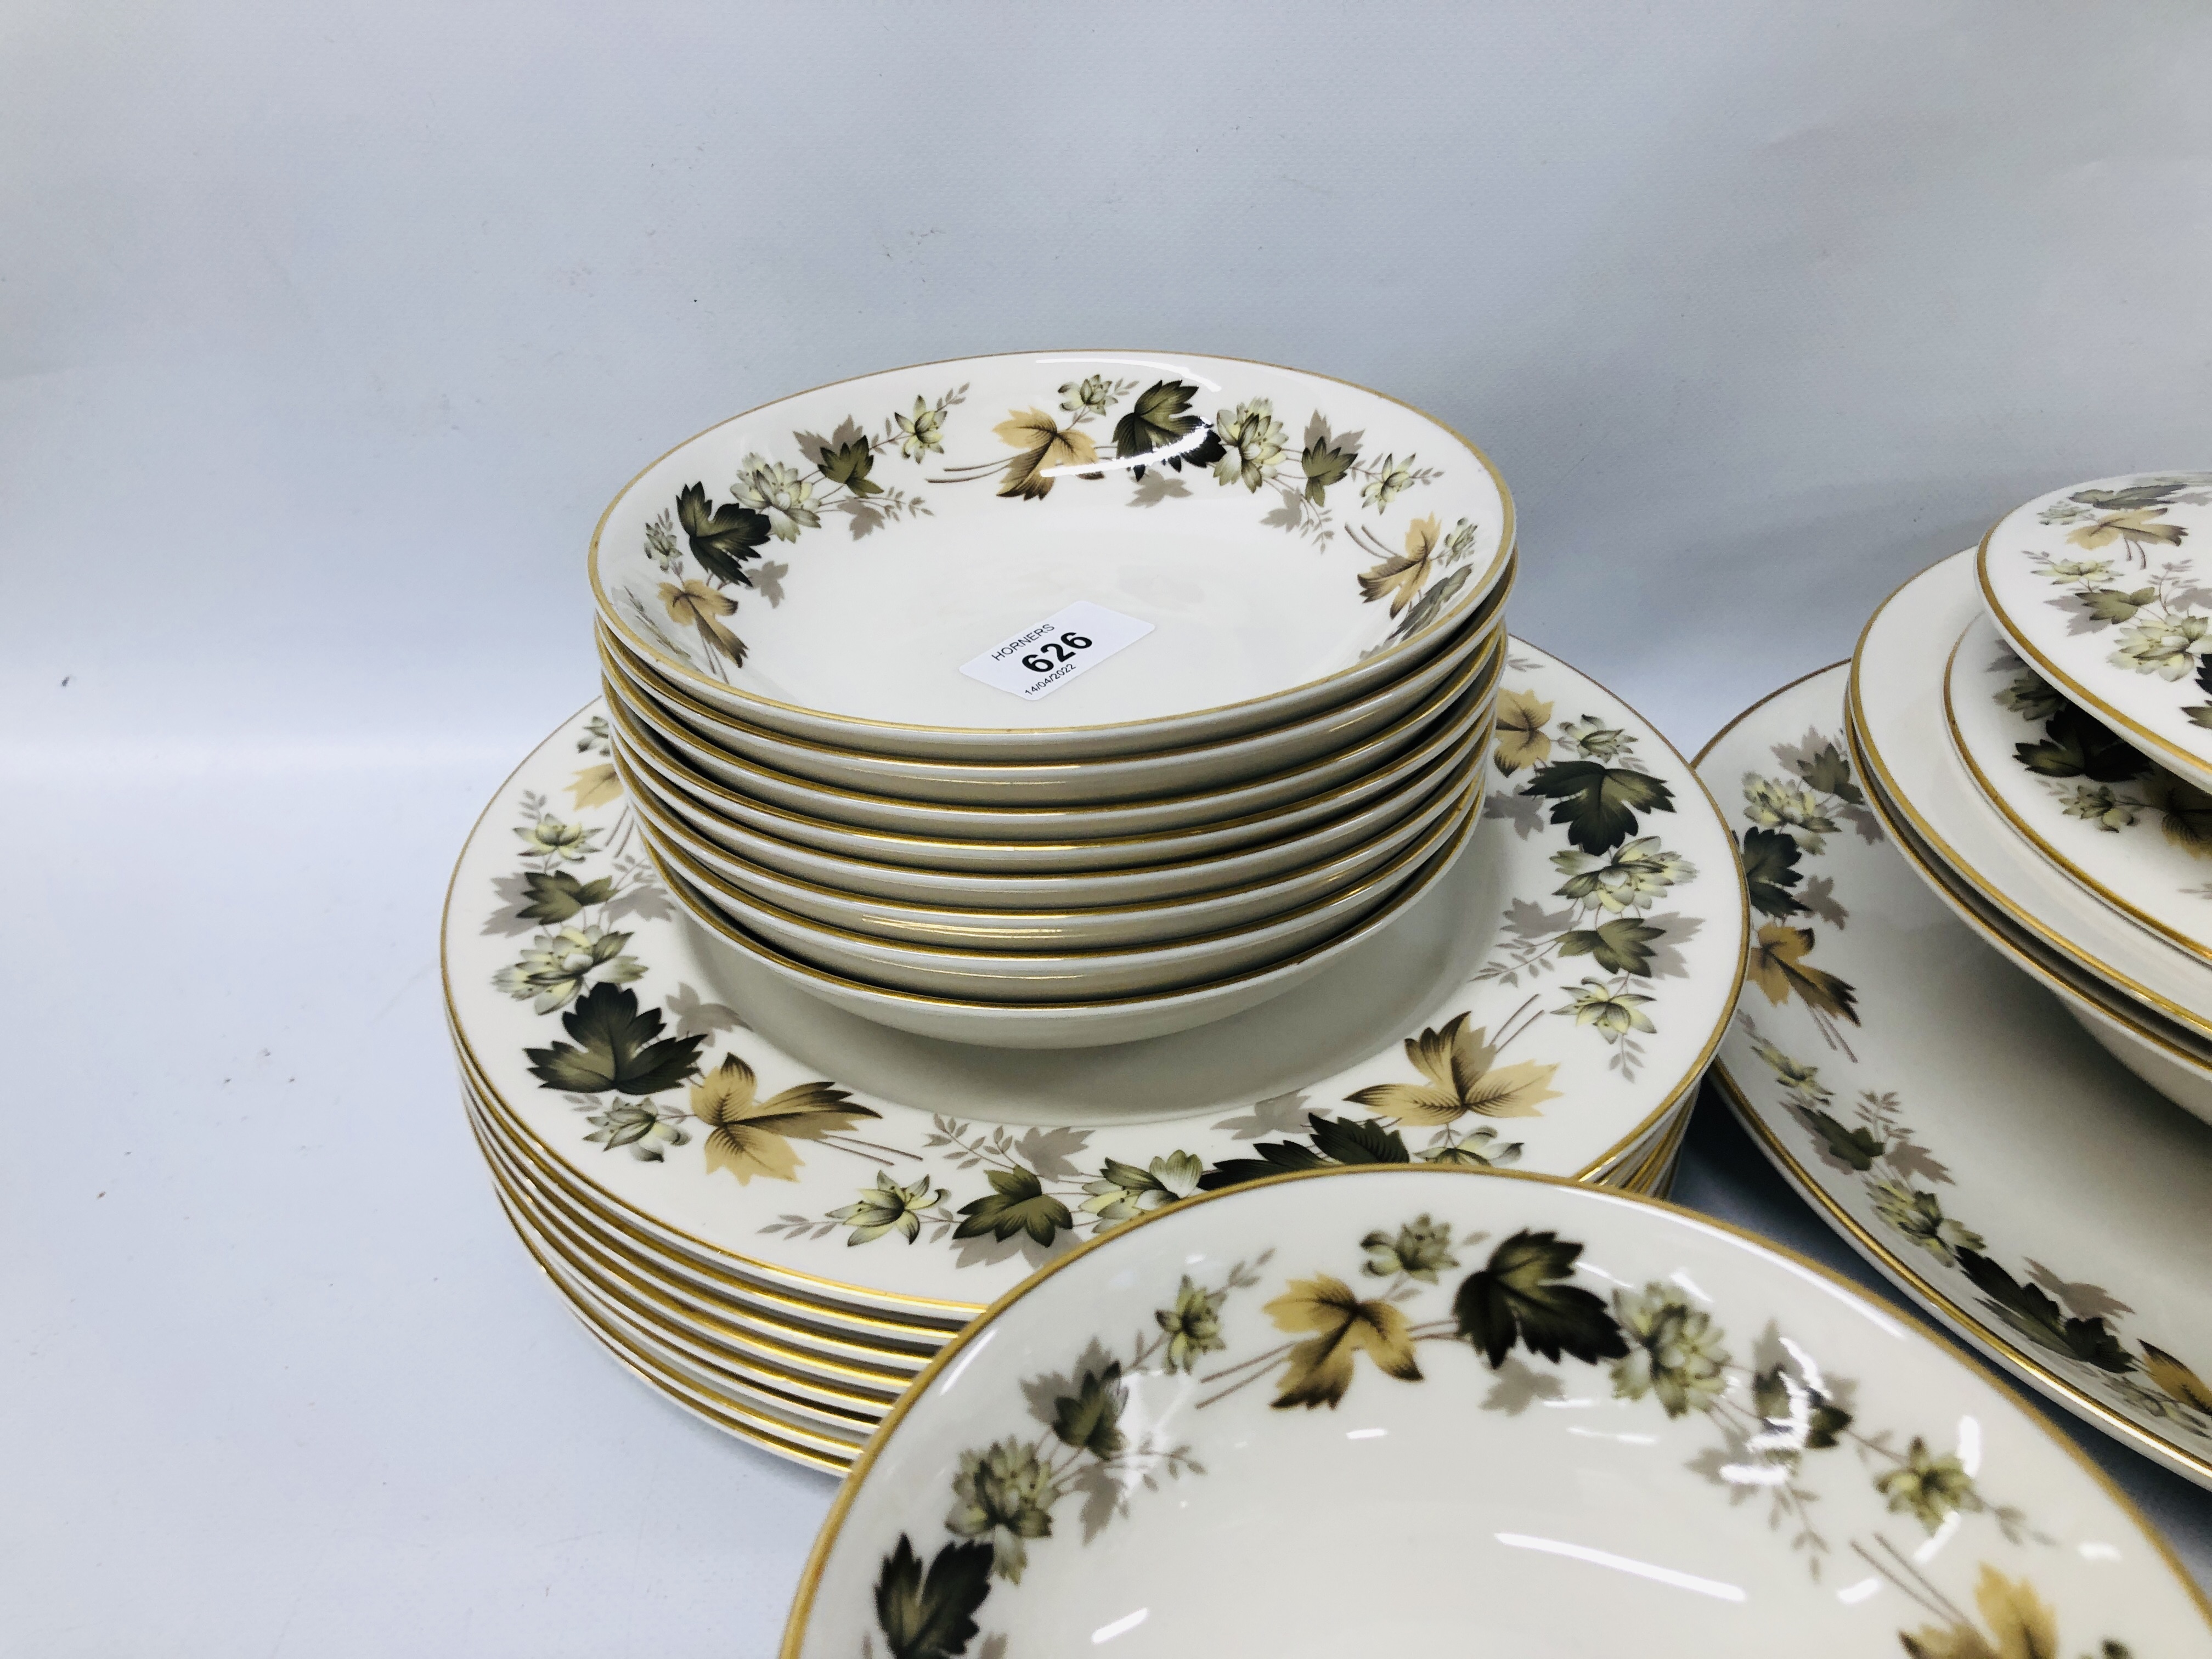 COLLECTION OF ROYAL DOULTON "LARCHMONT" TC1019 TEA AND DINNER WARE (APPROX. - Image 8 of 9